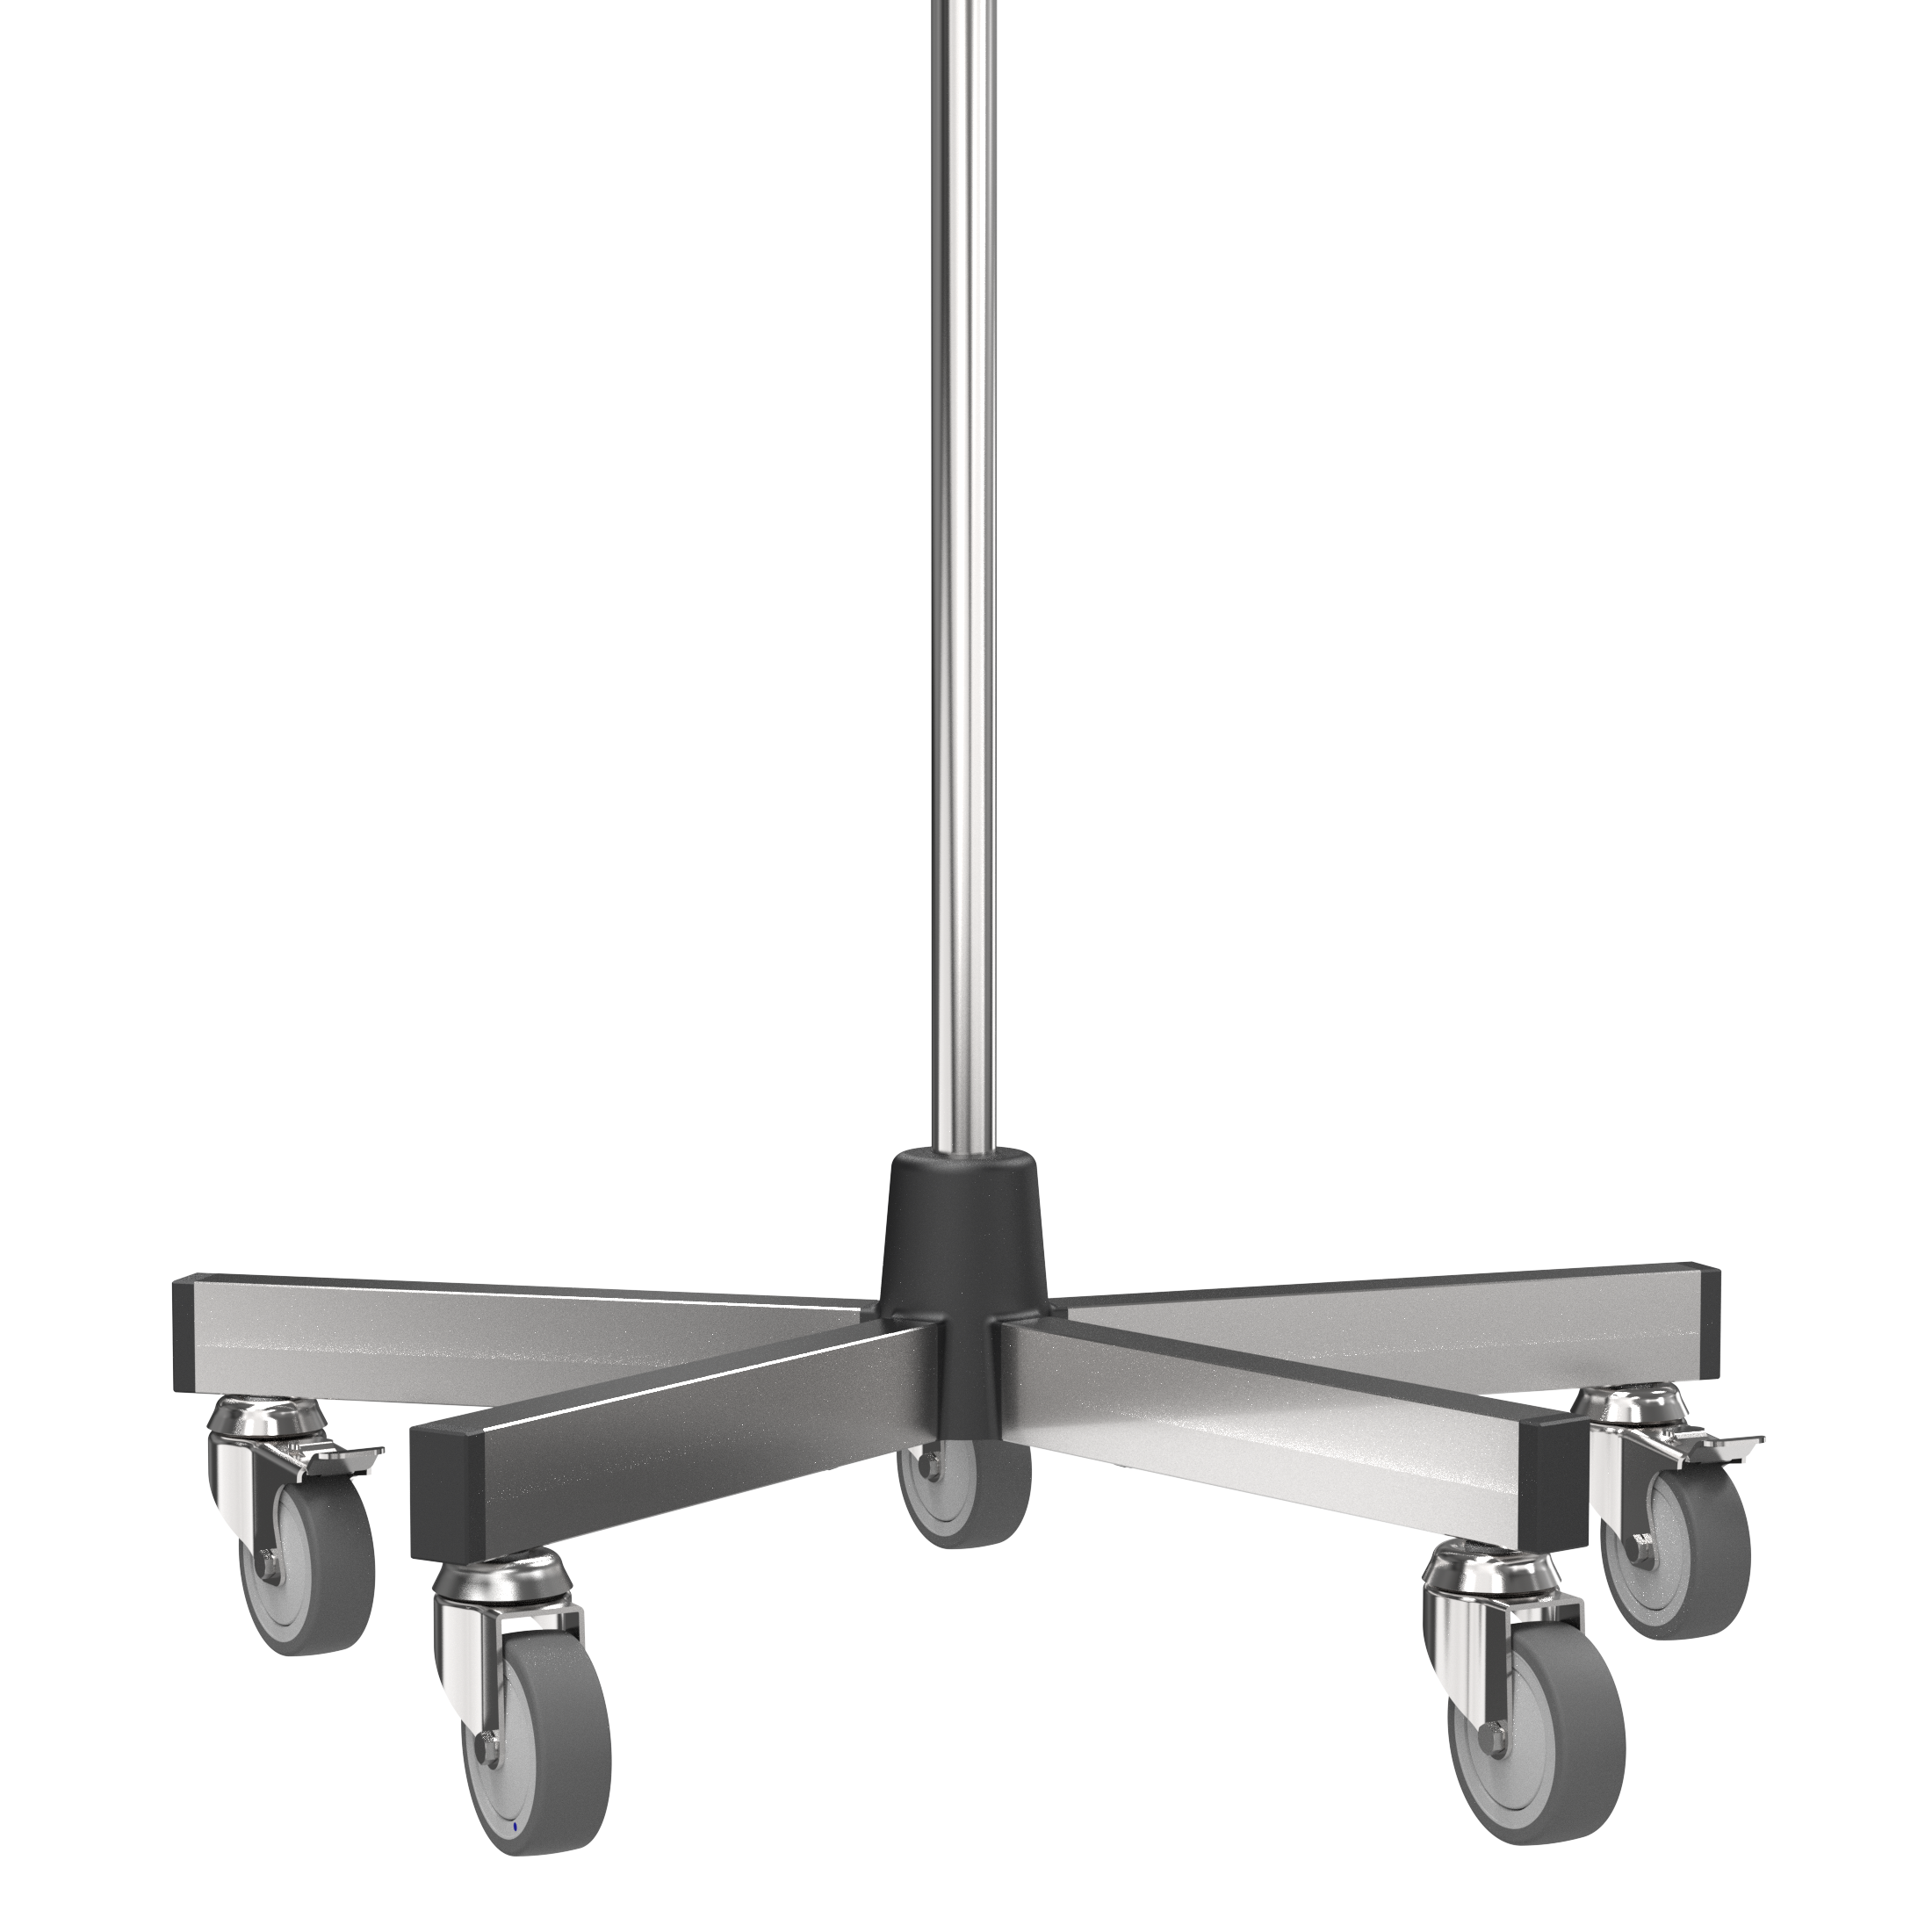 I.V. stand / Drip stand